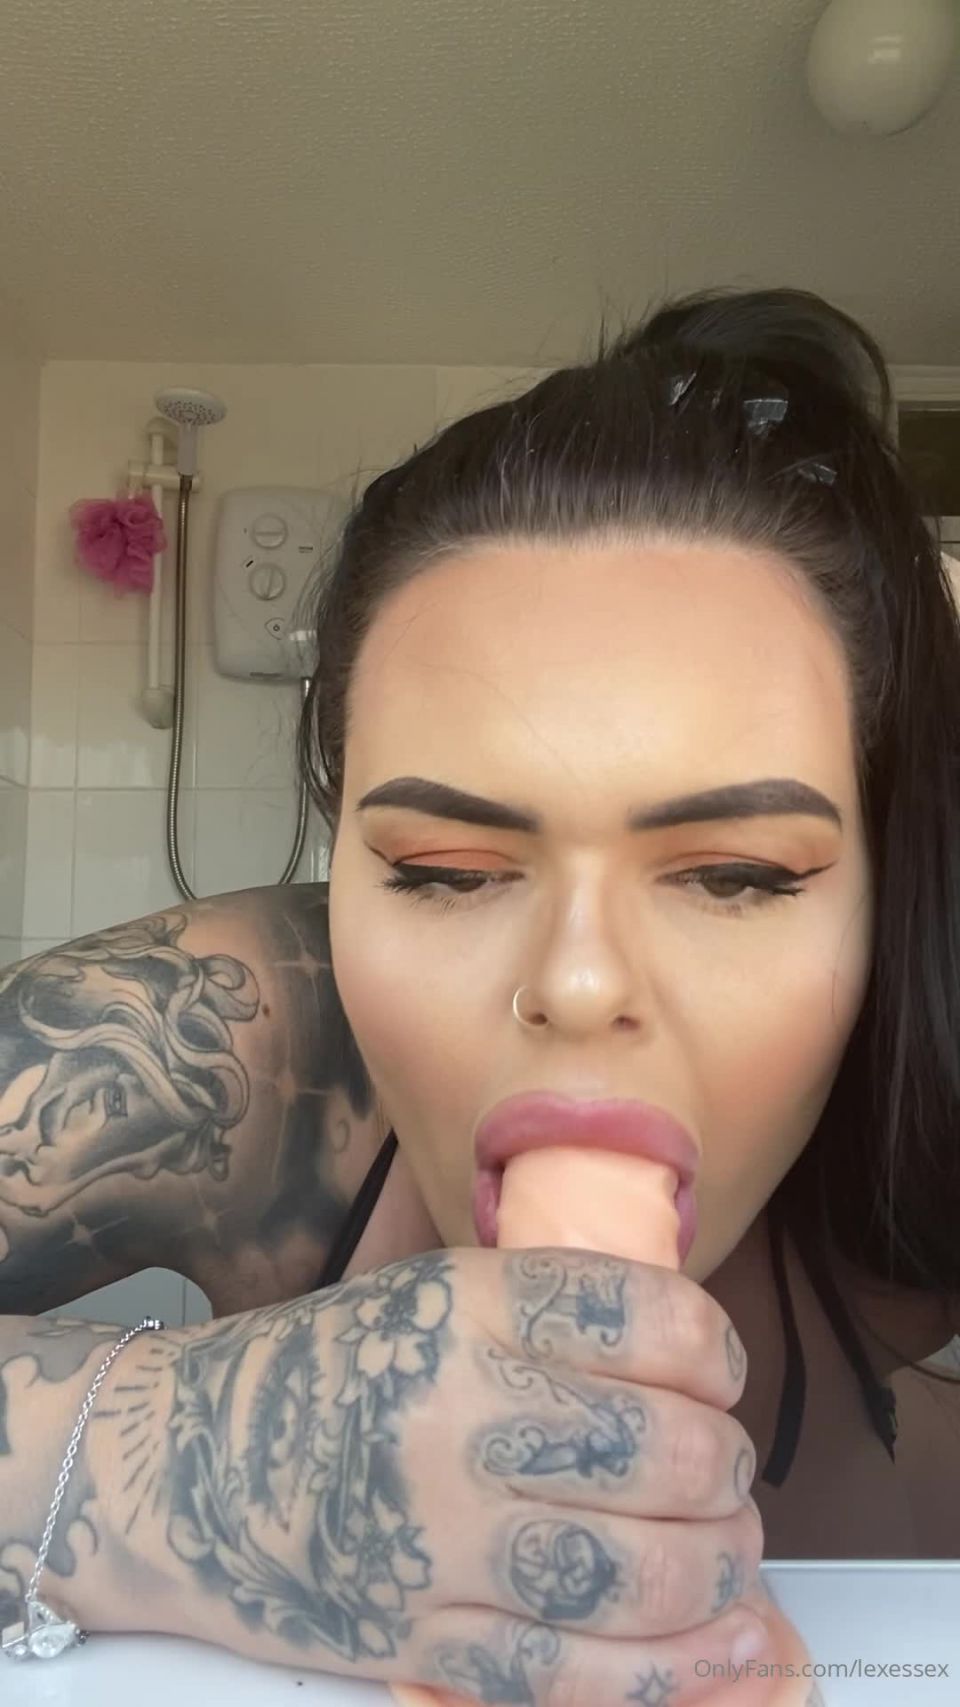 LEXIE ESSEX () Lexessex - sloppy as fuck i wanna gag l over your cock daddy just like this 14-04-2020